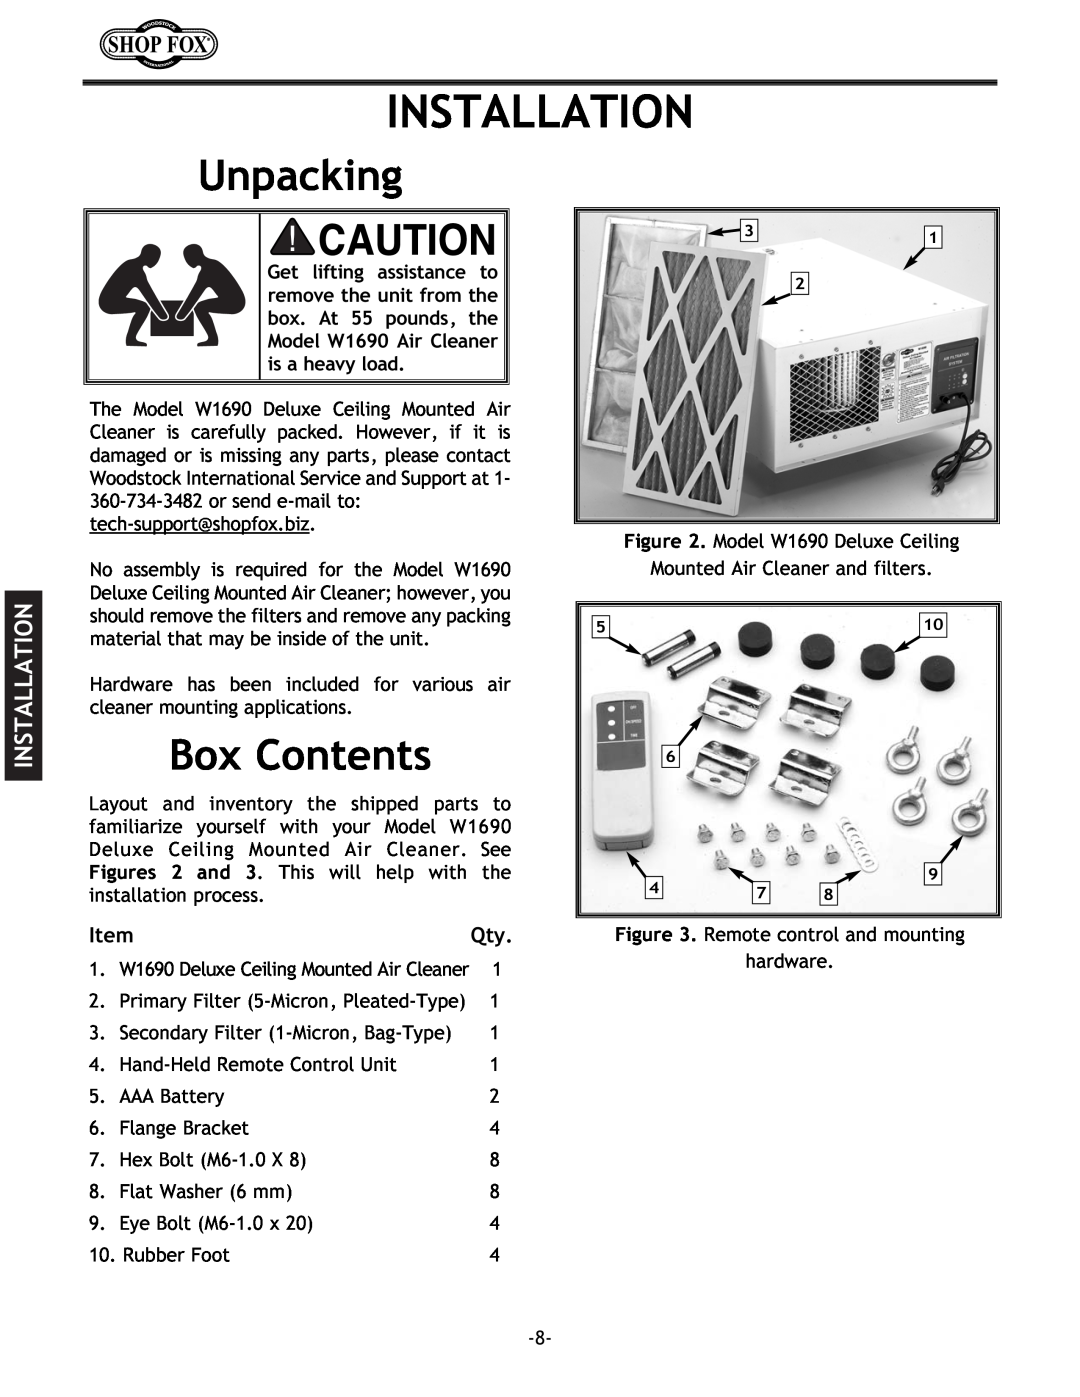 Woodstock W1690 instruction manual Installation, Unpacking, Box Contents 